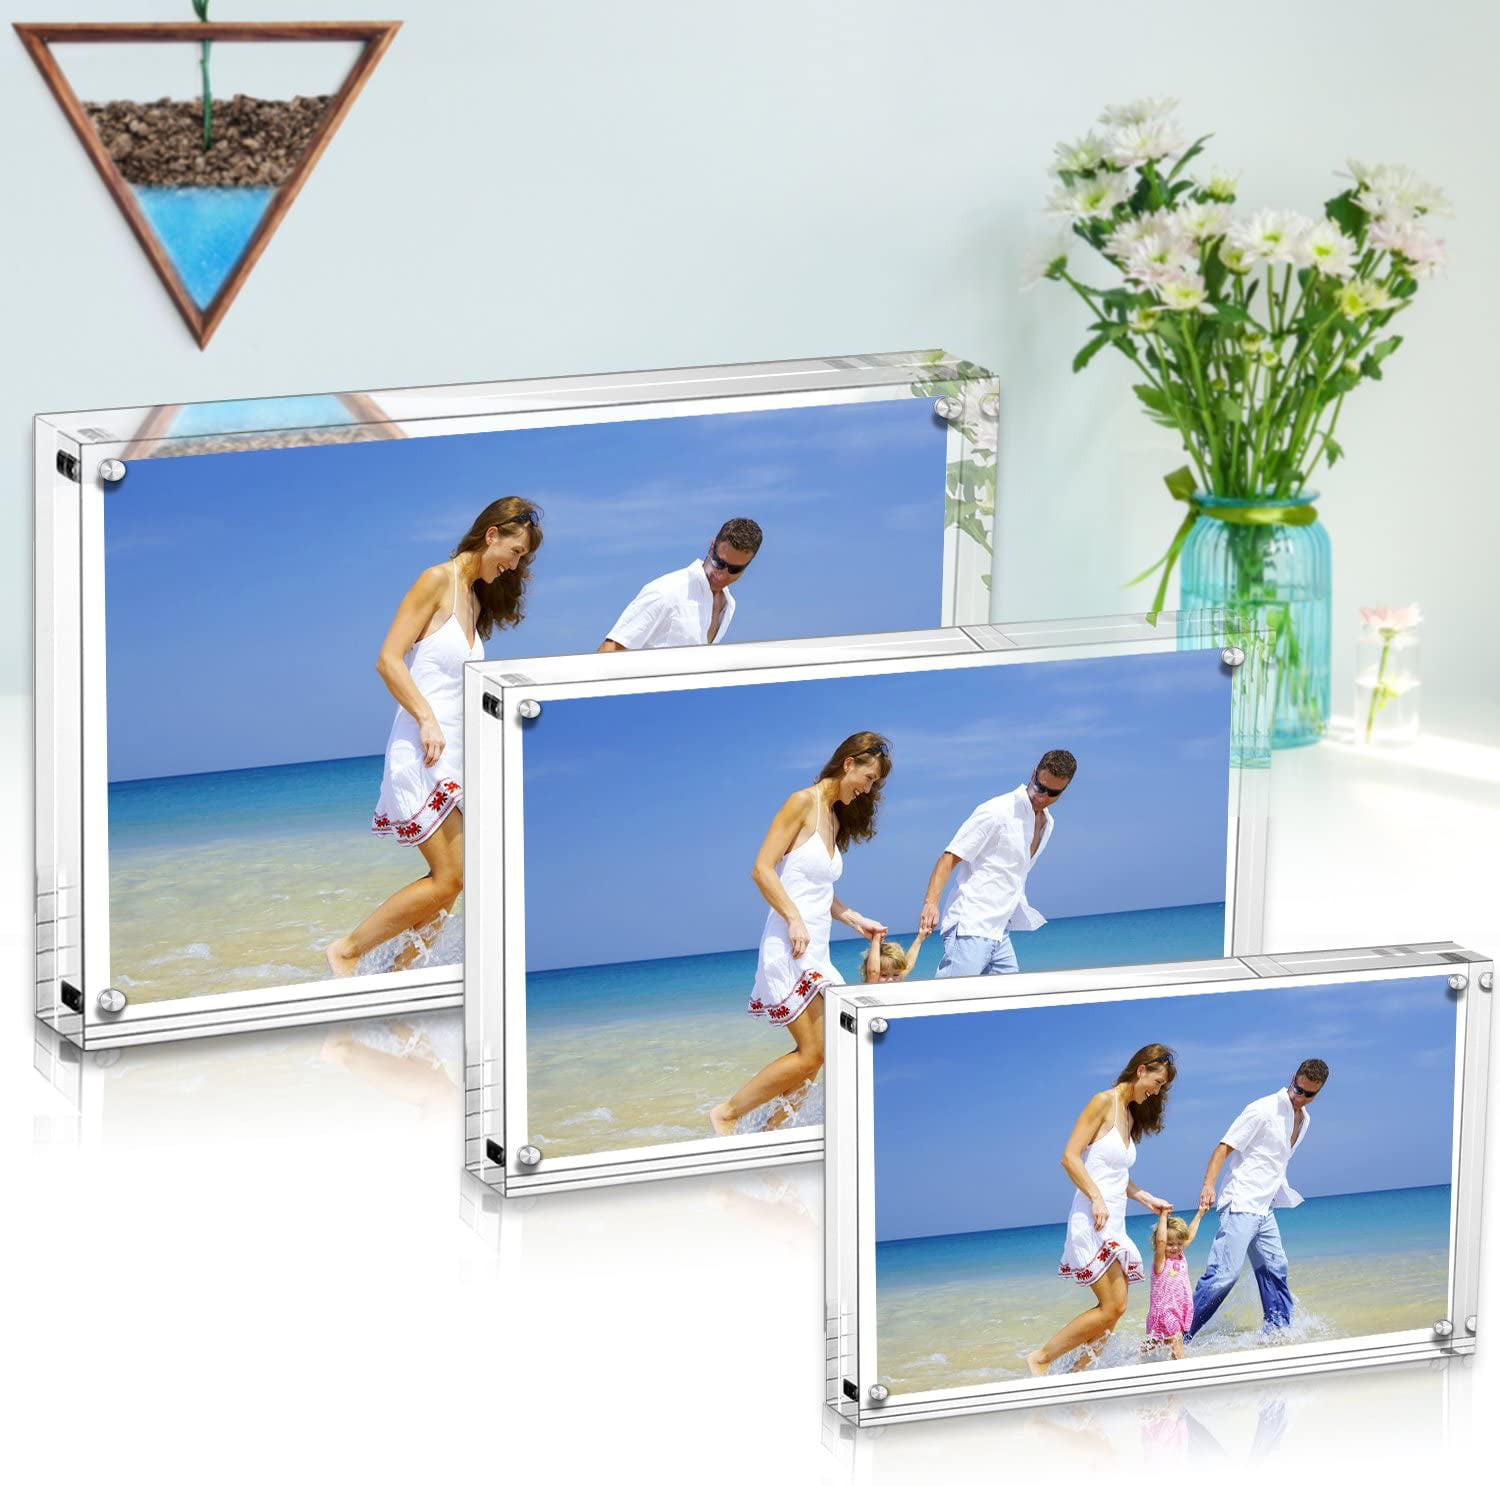 AMEITECH Acrylic Picture Frames, 4x6 inch Double Sided Desktop Frameless Magnetic Photo Frame with Gift Box Package, Size: 4×6, Clear